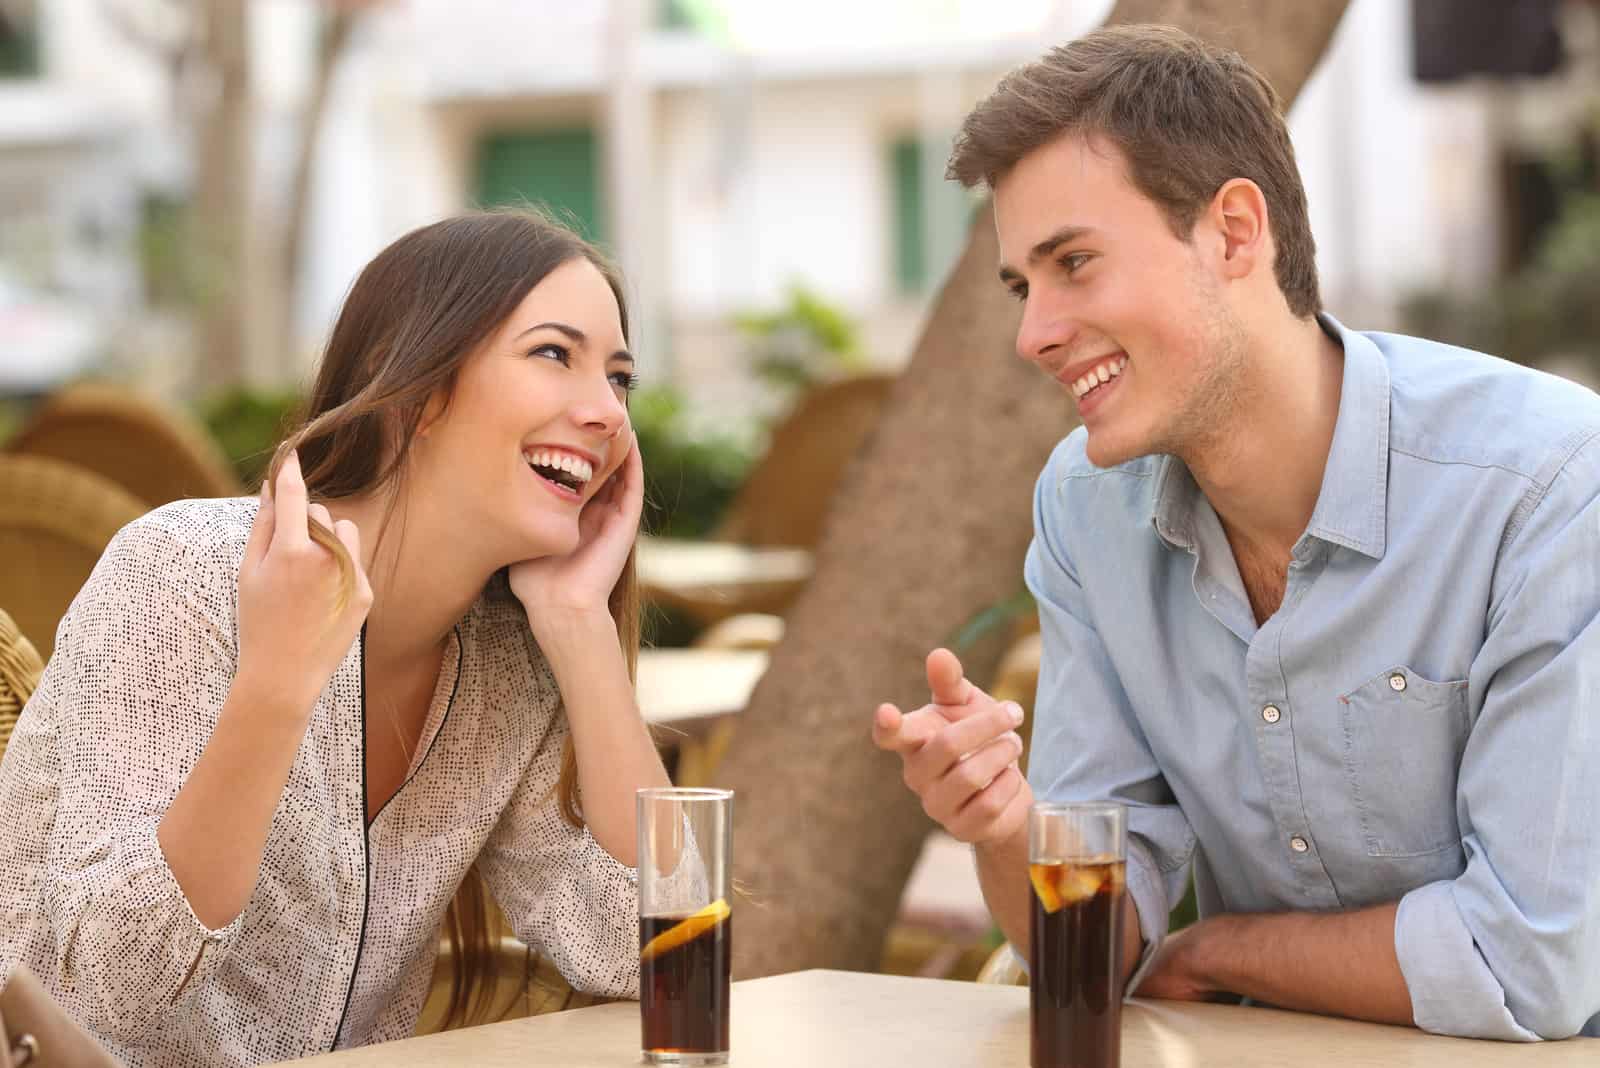 Couple dating and flirting while taking a conversation